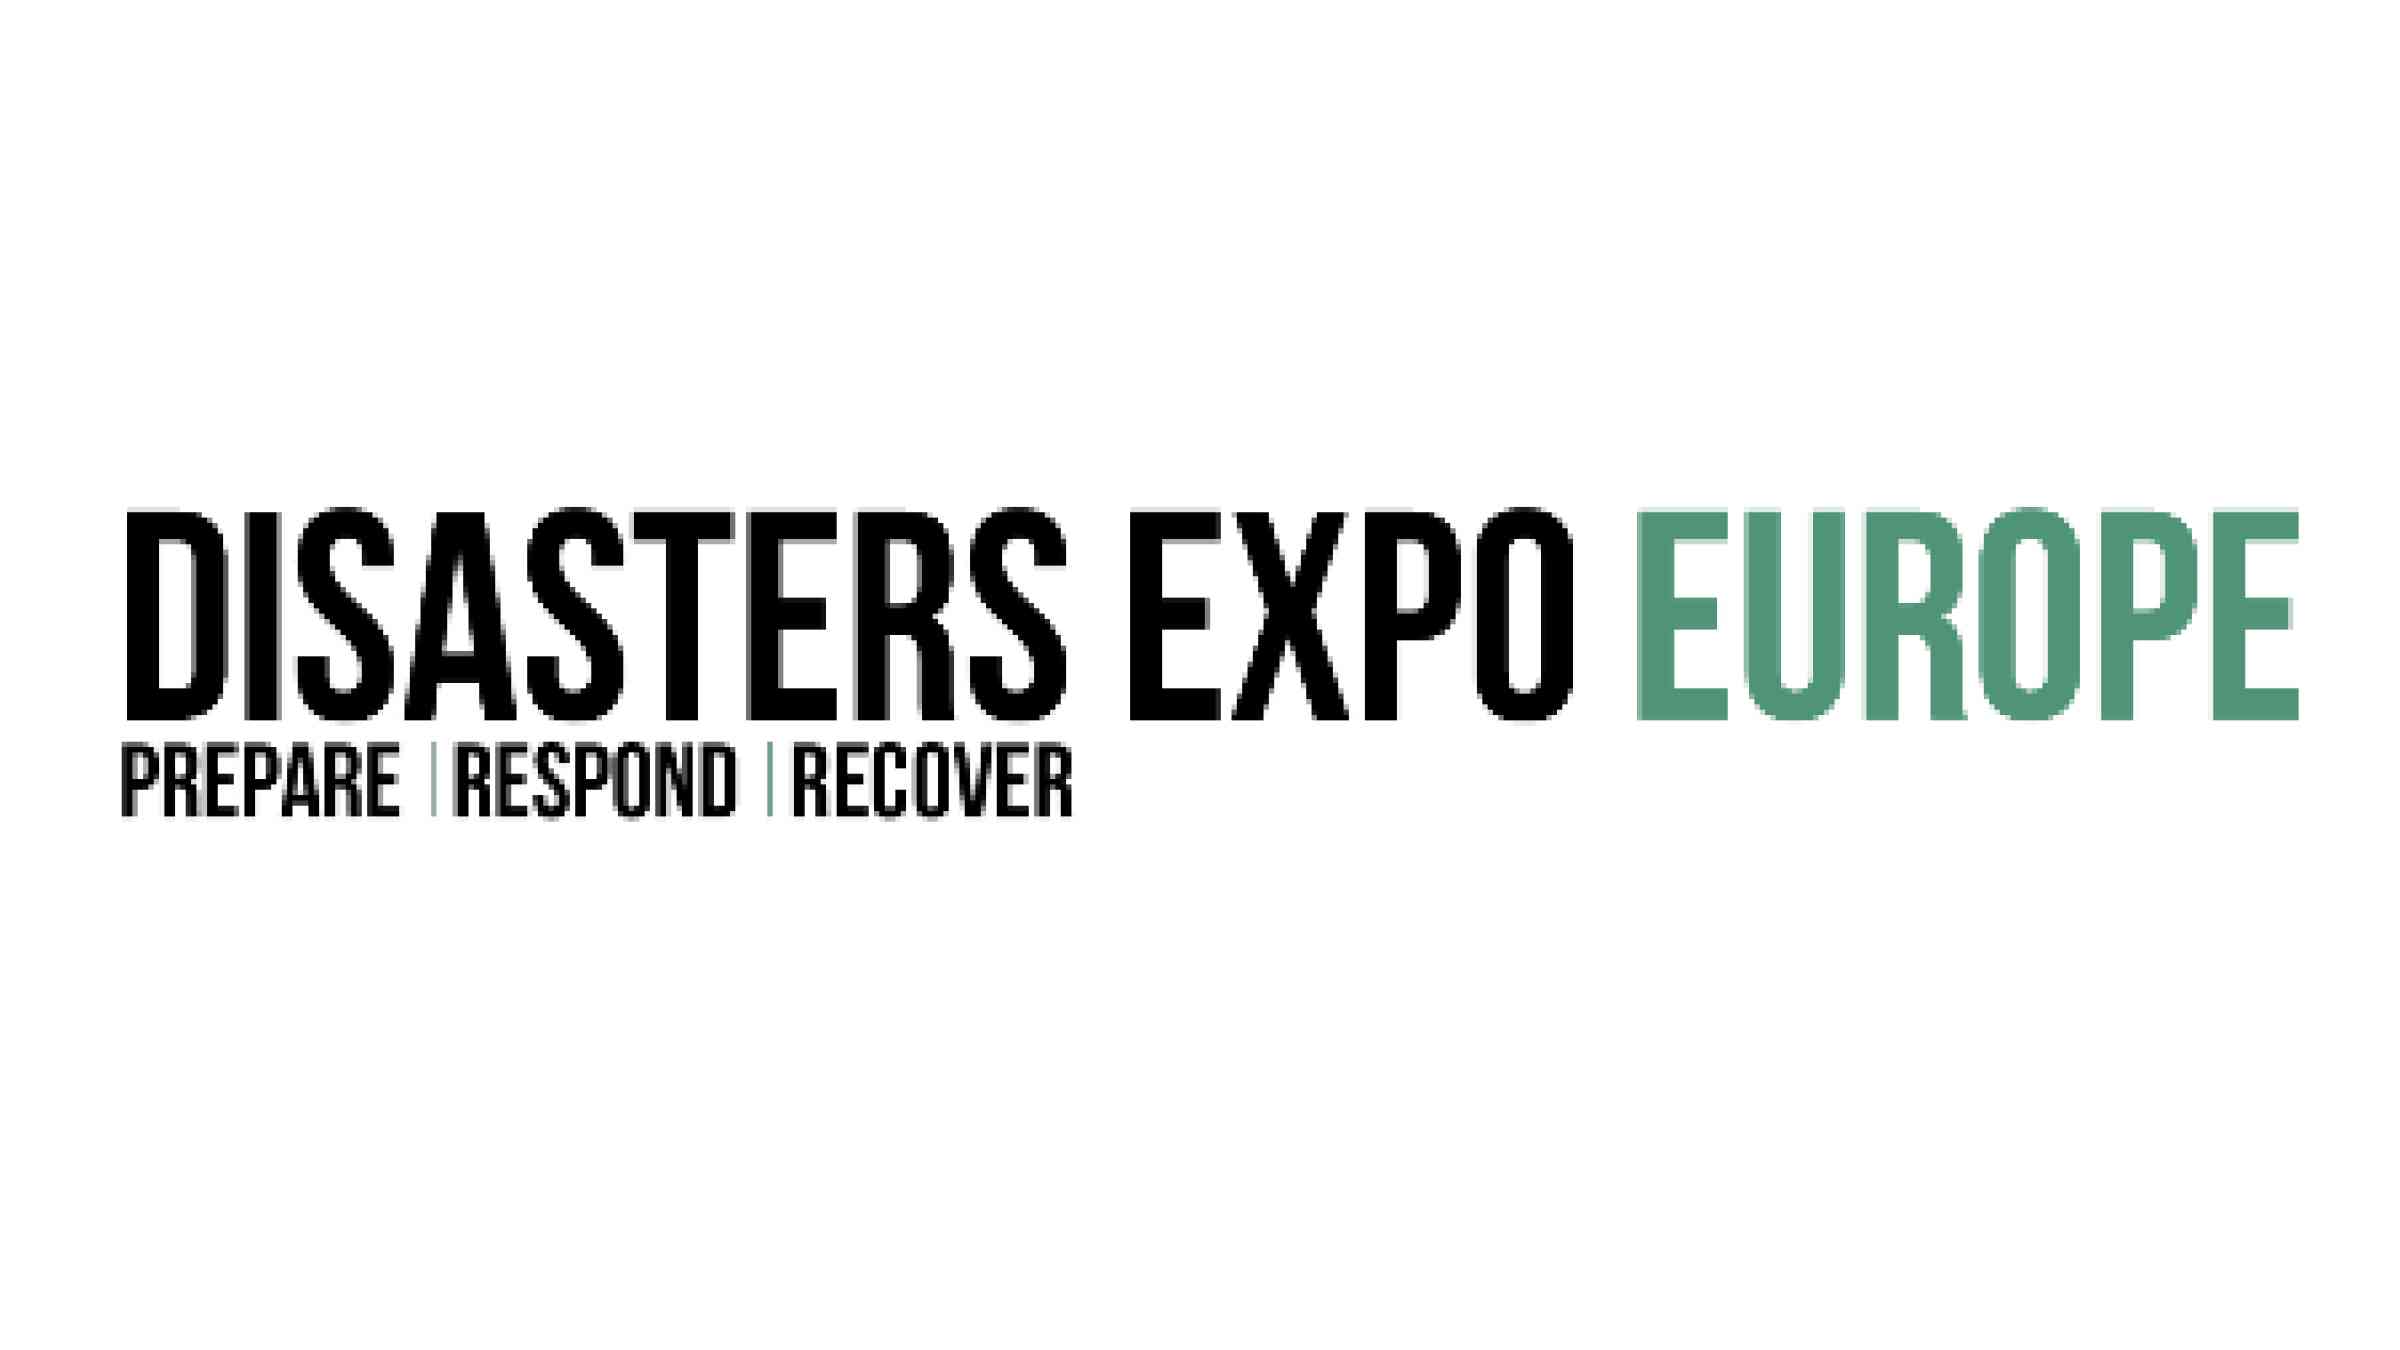 Banner and source: Disasters Expo Europe